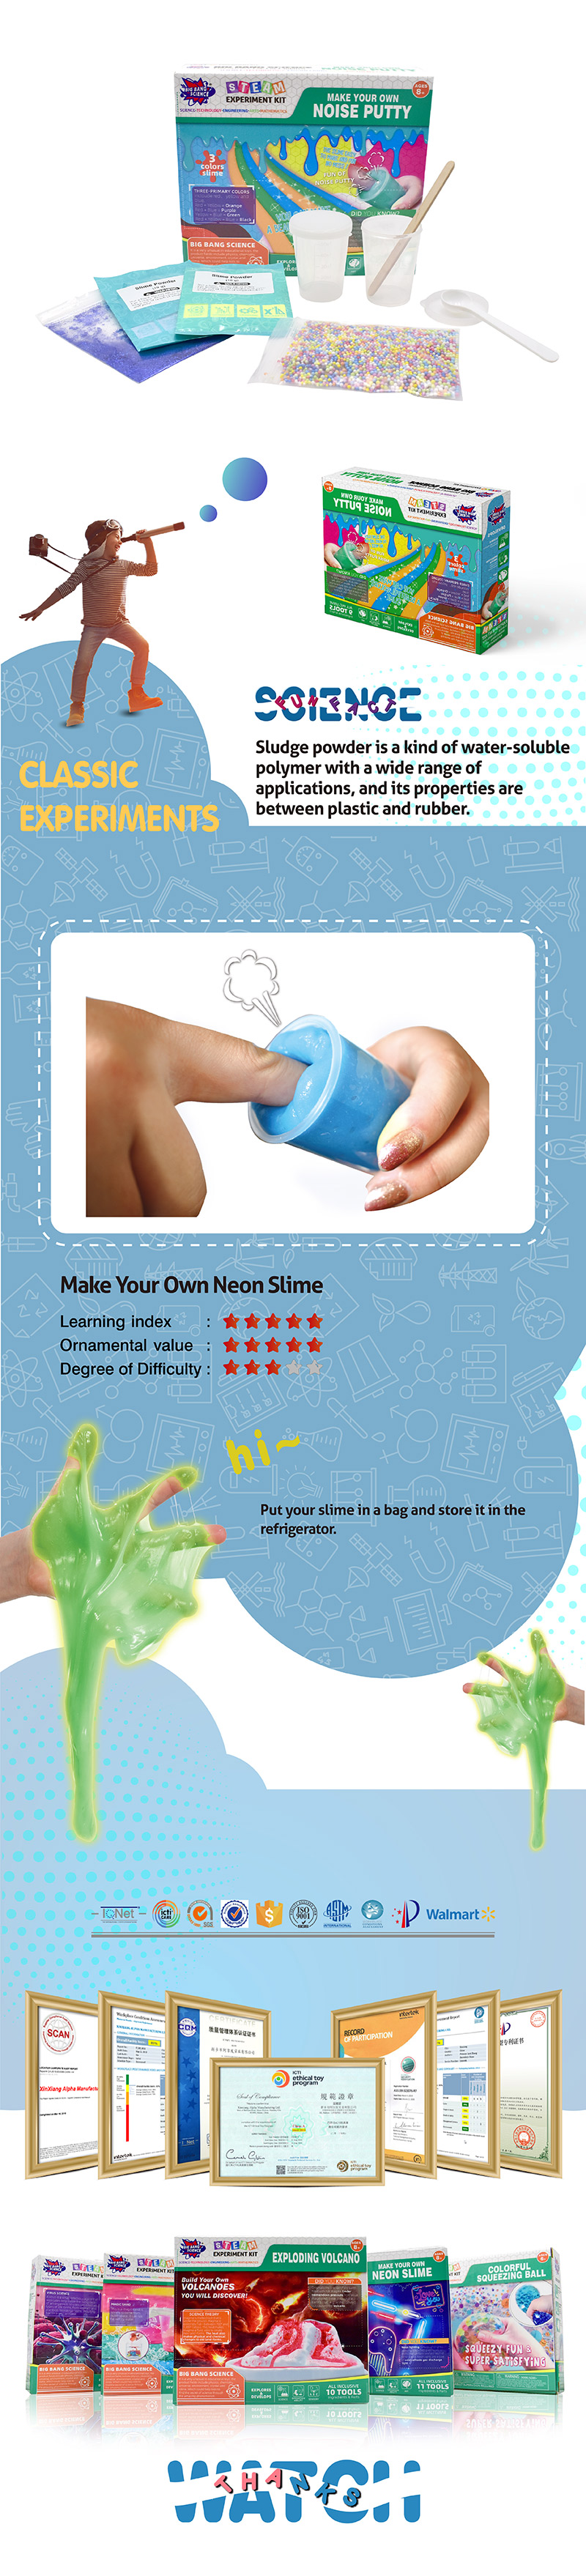 SS190916M-Make-your-own-noise-putty toy